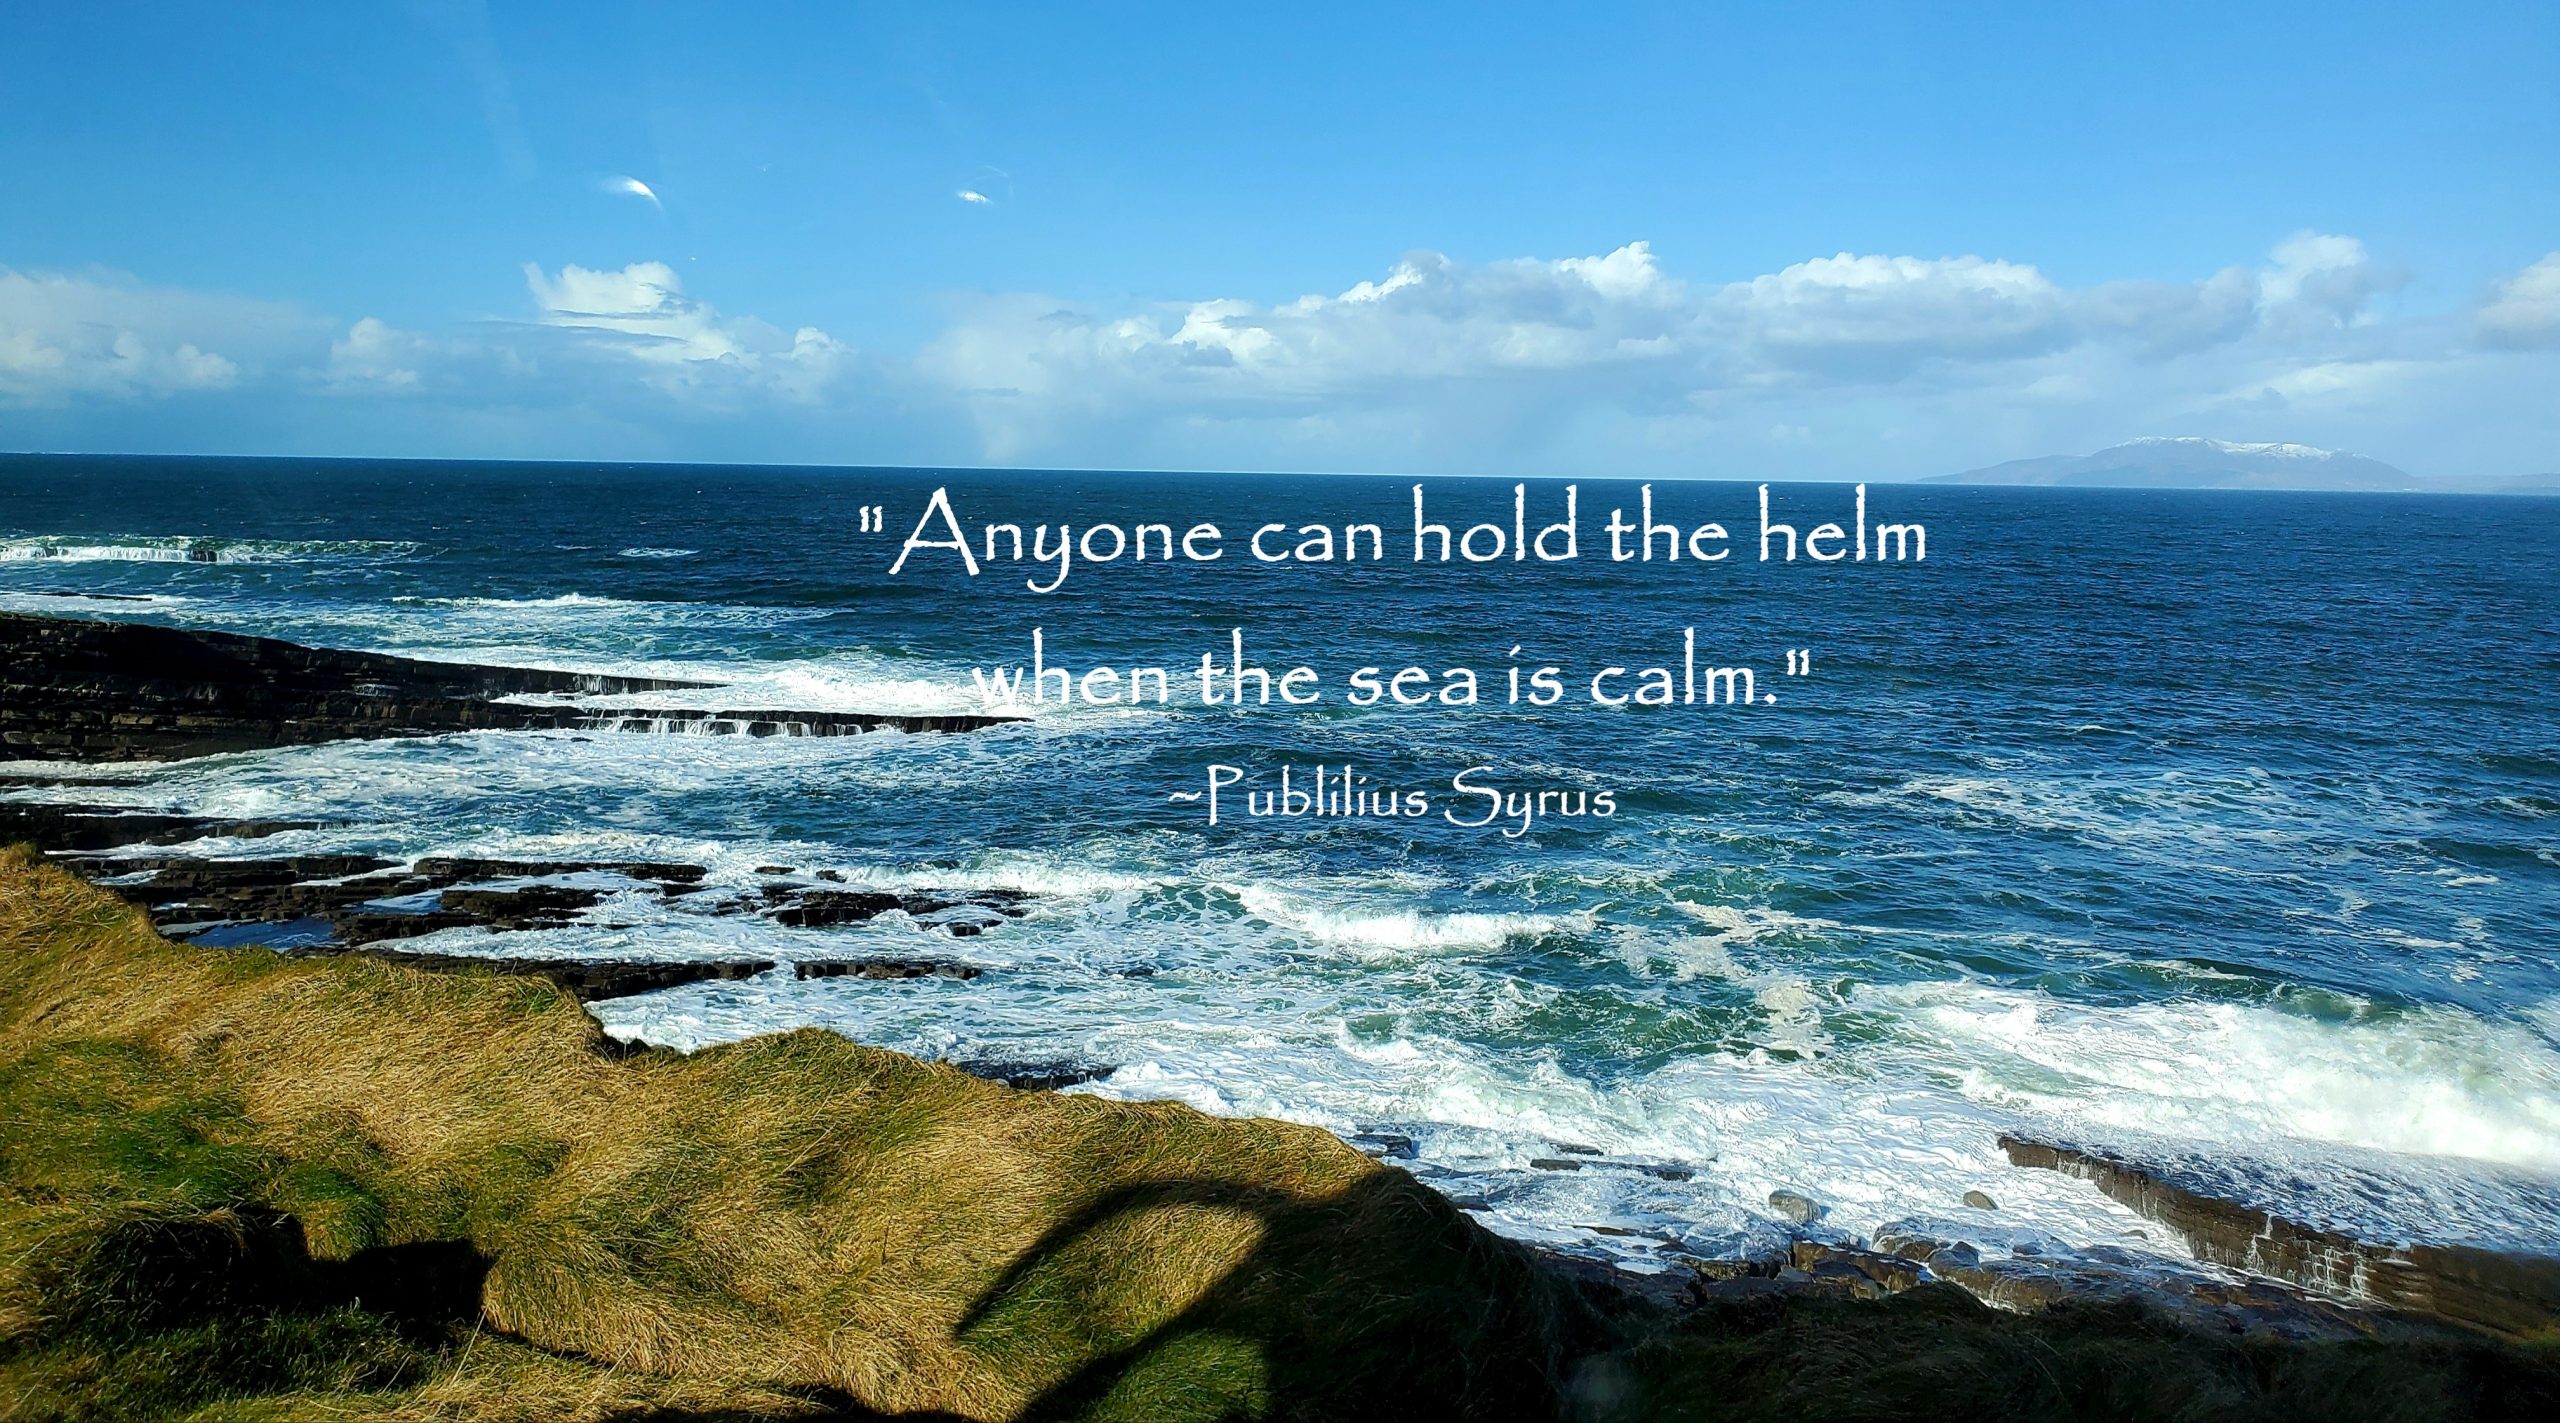 Irish sea with quote Anyone can hold the helm when the sea is calm by Publilius Syrus